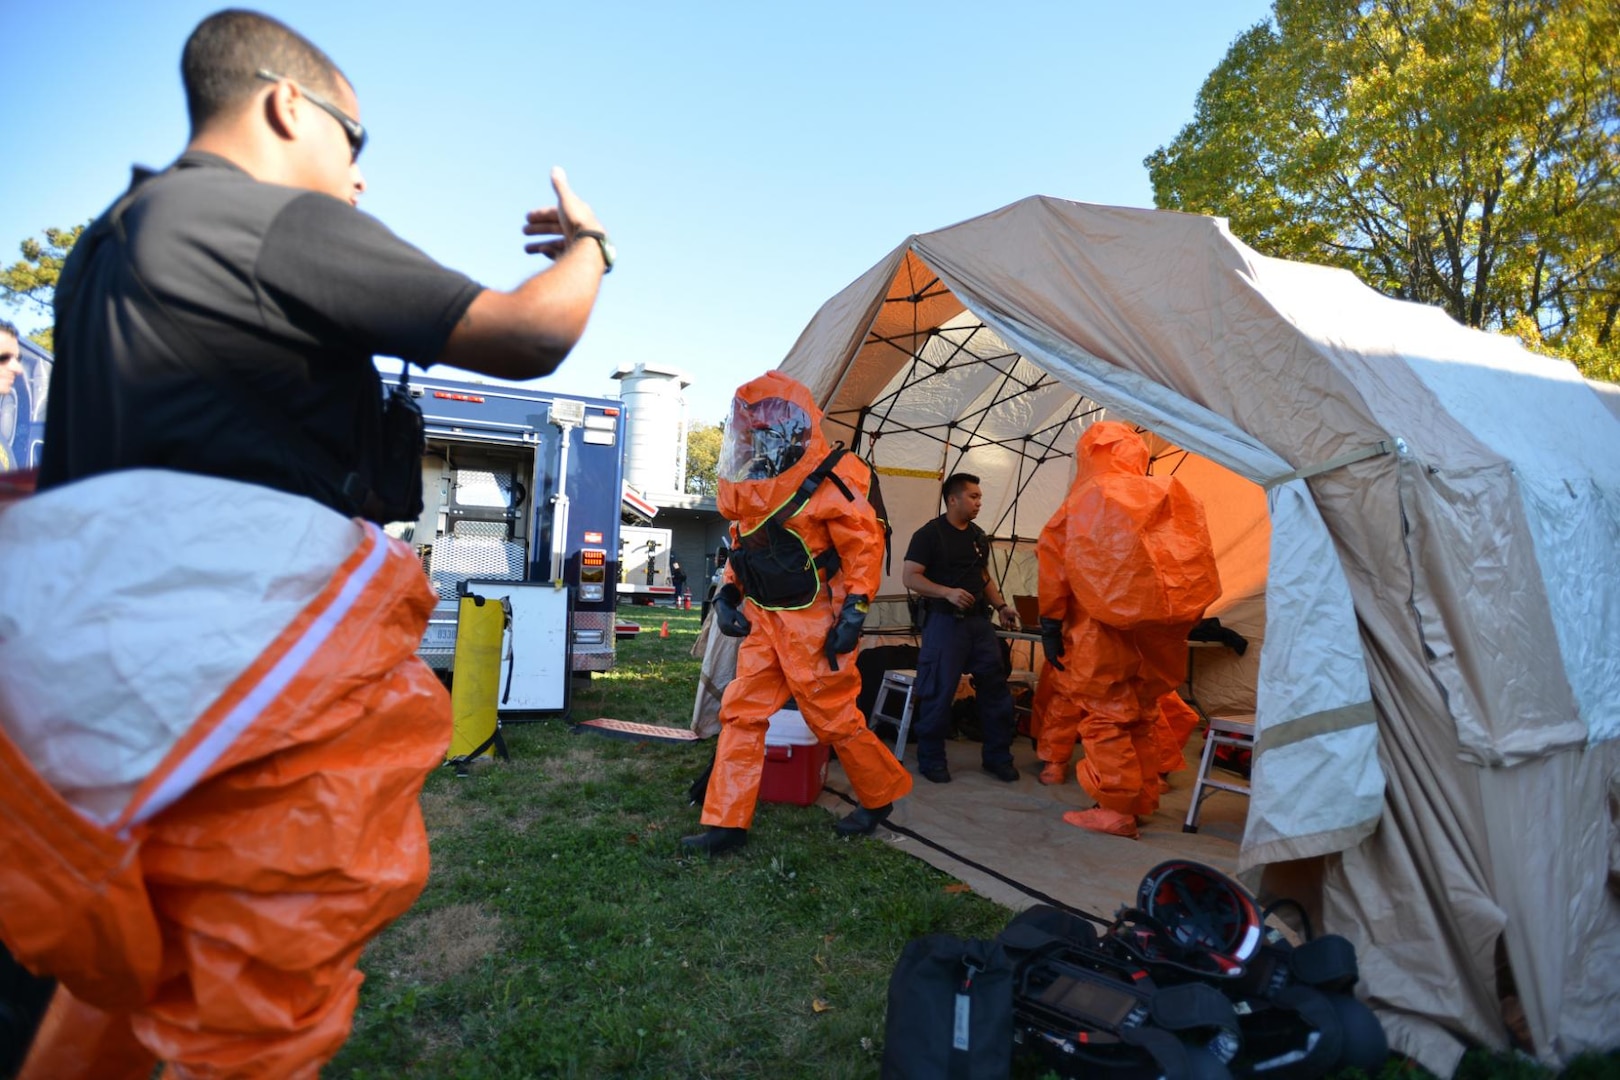 Members of the New York National Guard's 24th Weapons of Mass Destruction Civil Support Team exit the decontamination tent during a drill at the Suffolk County Water Authority's New Highway Pump Station, Oct. 27, 2014. National Guard civil support teams are trained to identify the presence of chemical, biological, or radiological agents and provide that information to local authorities. The exercise tested response protocols to intruder events and to identify and correct any existing weaknesses in station security.